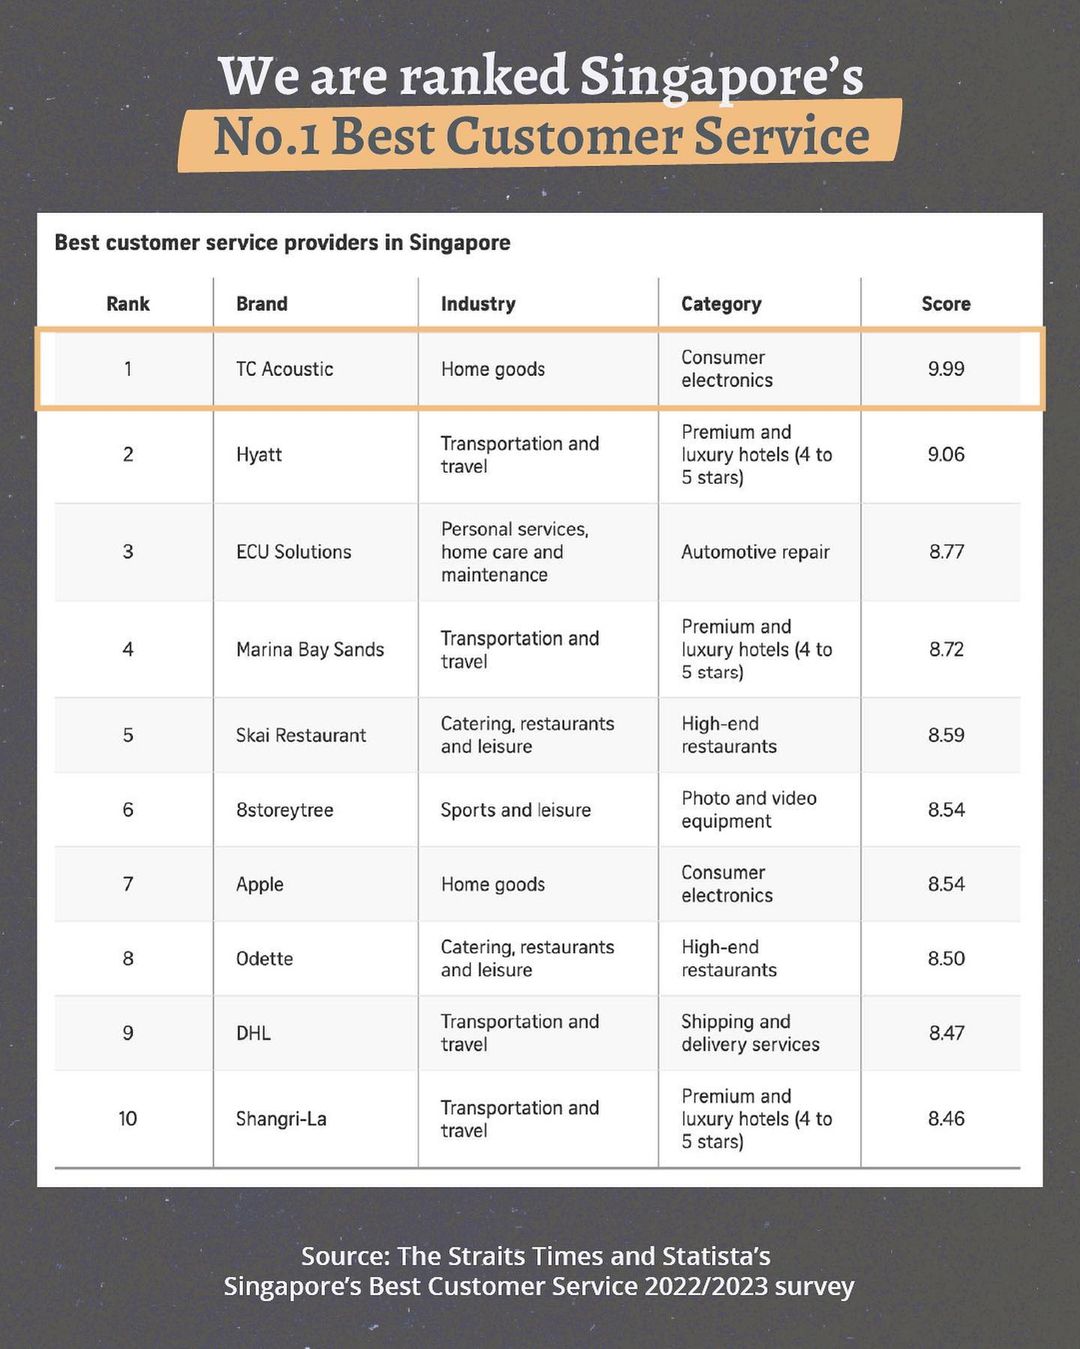 Results table of The Straits Times and Statista’s Singapore Best Customer Service 2022/2023 Survey